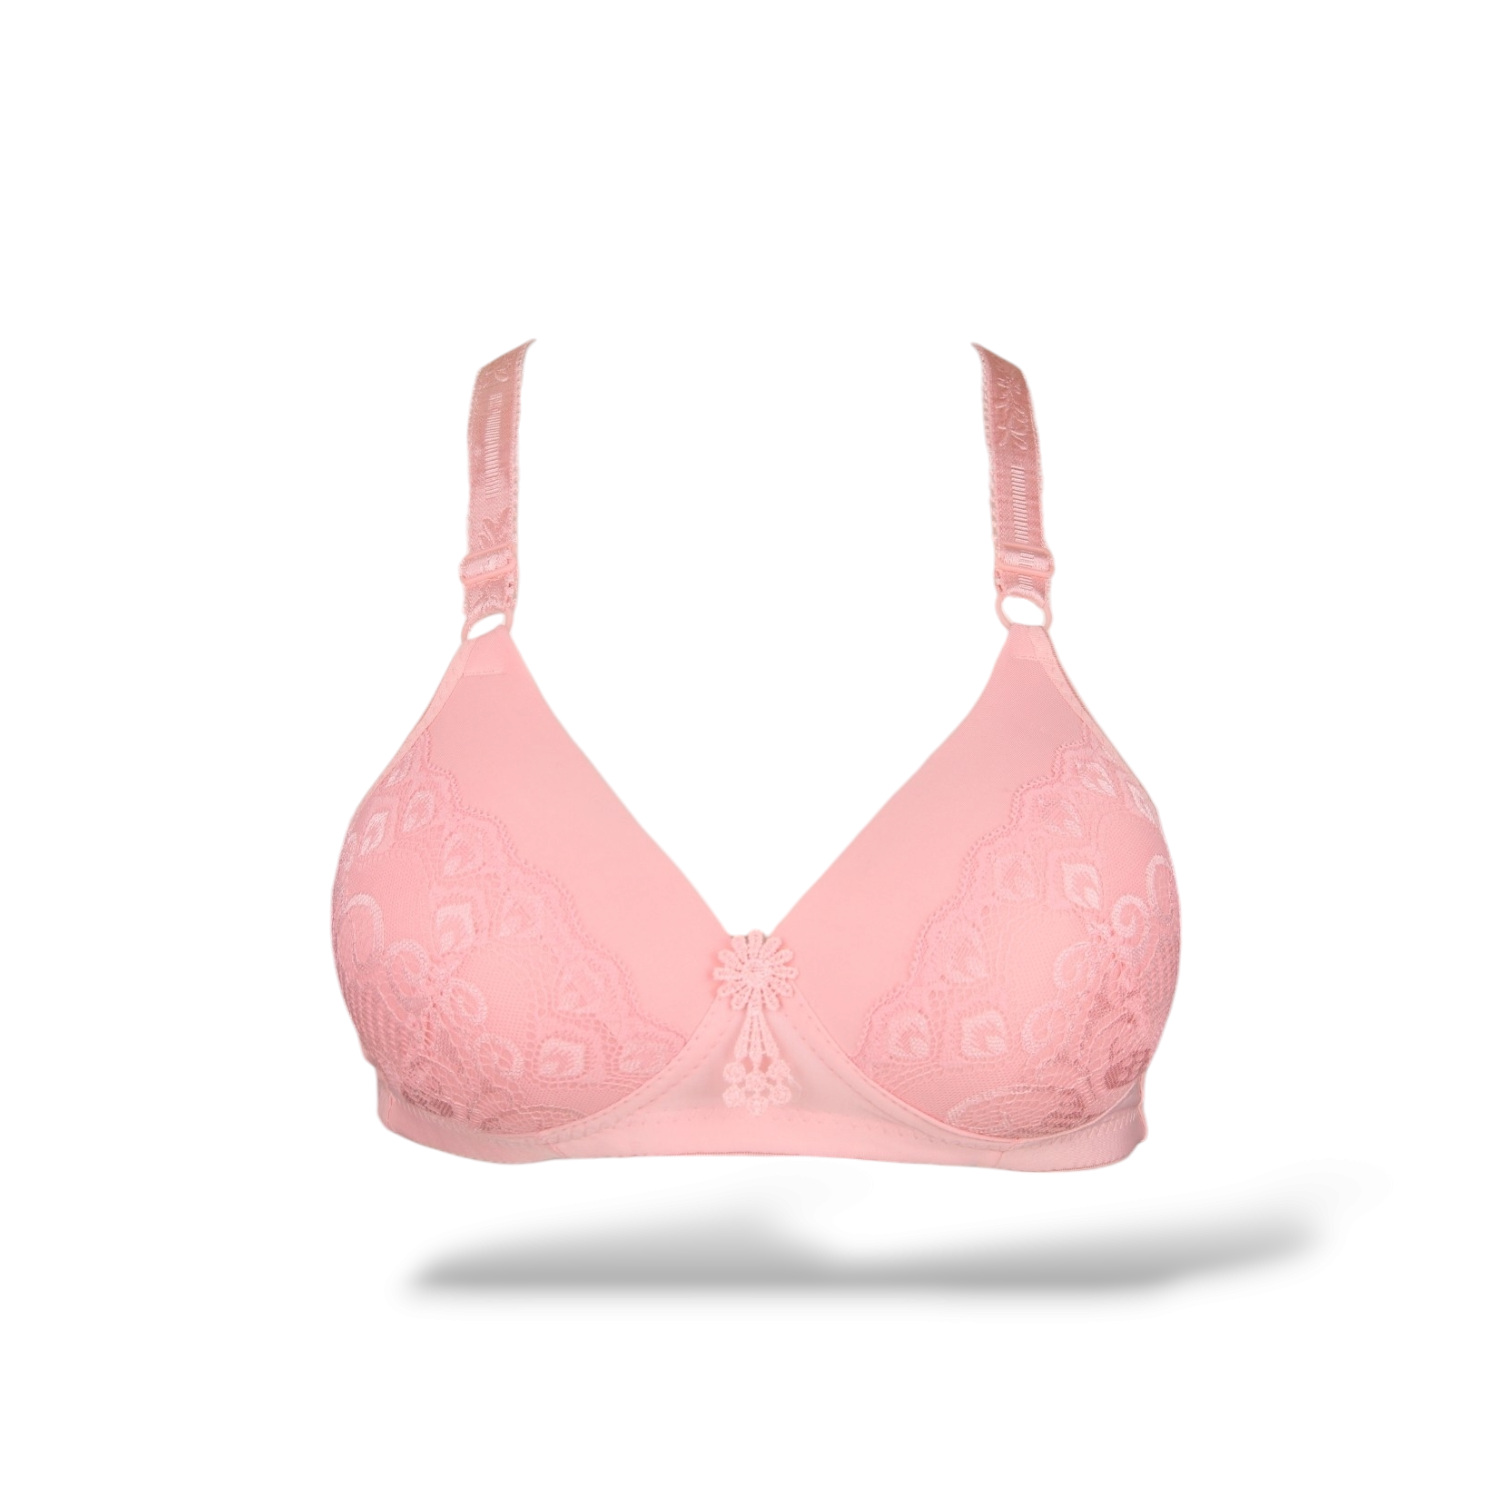 Everyday Essential Wired Push Up Bra 01 in Smooth Skin